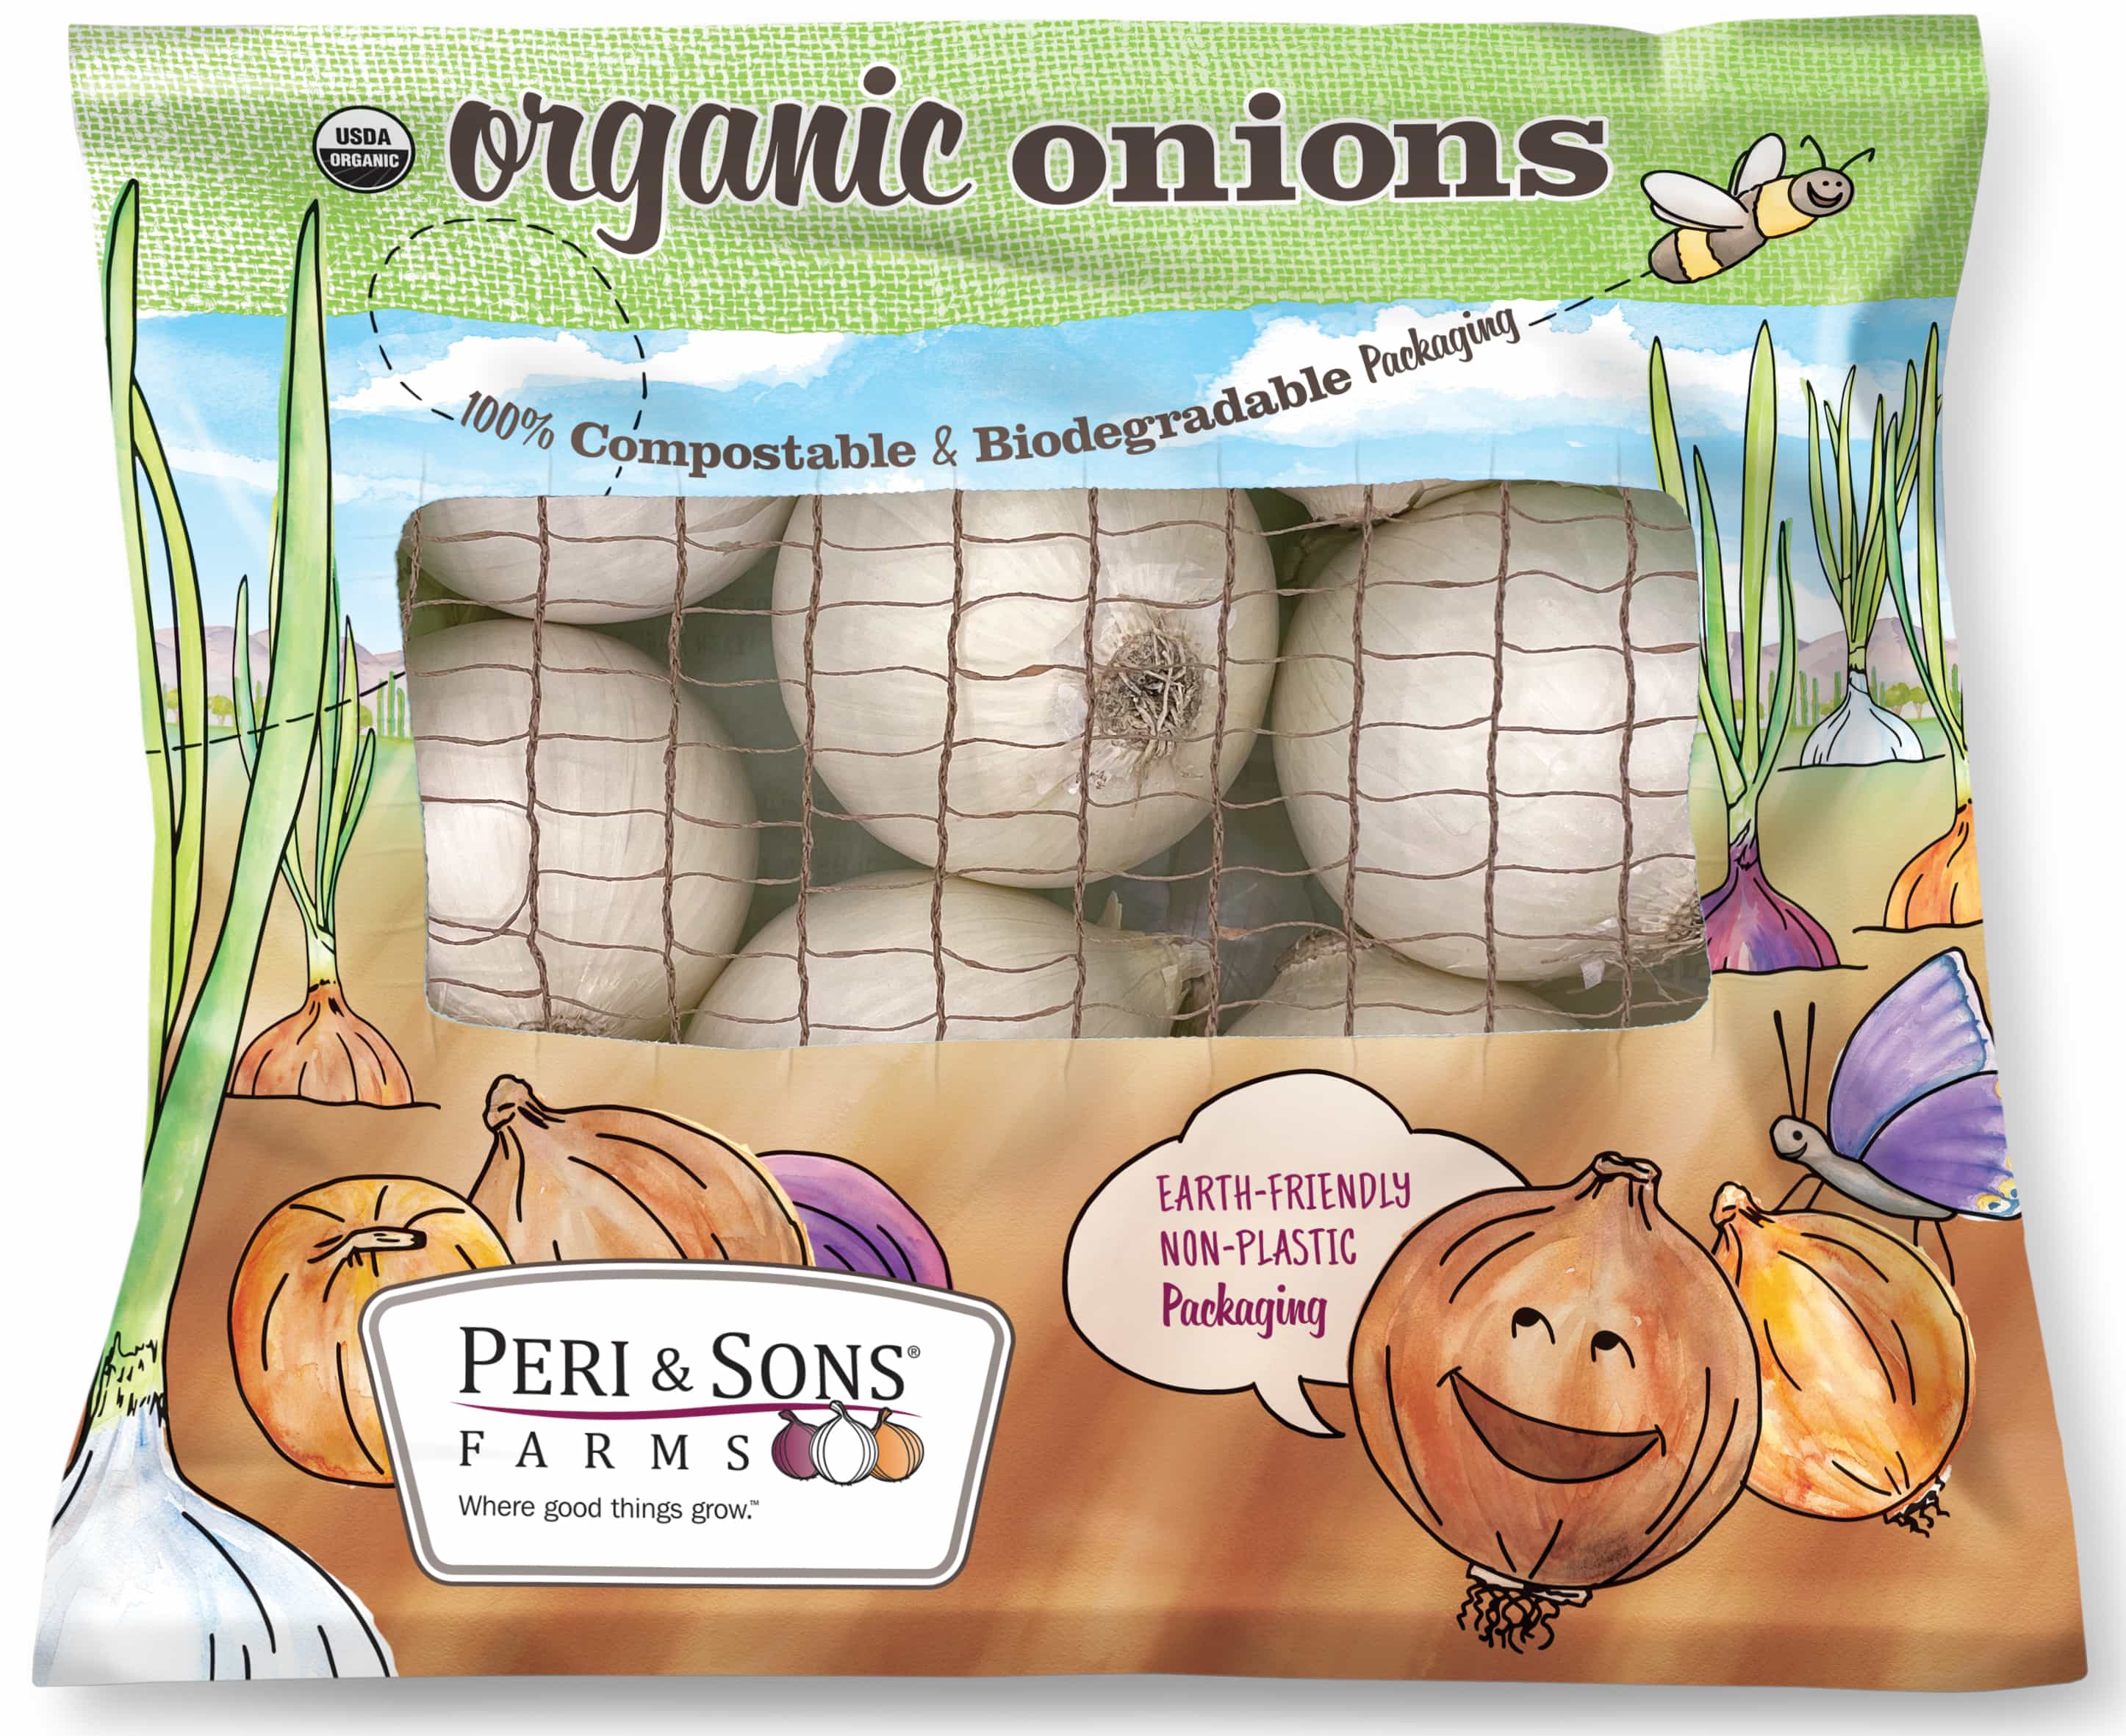 A bag of Peri & Sons Organic onions. White onions can be see through the net window of the package that has a cartoon type onion saying: Earth-Friendly Non-Plastic packaging.